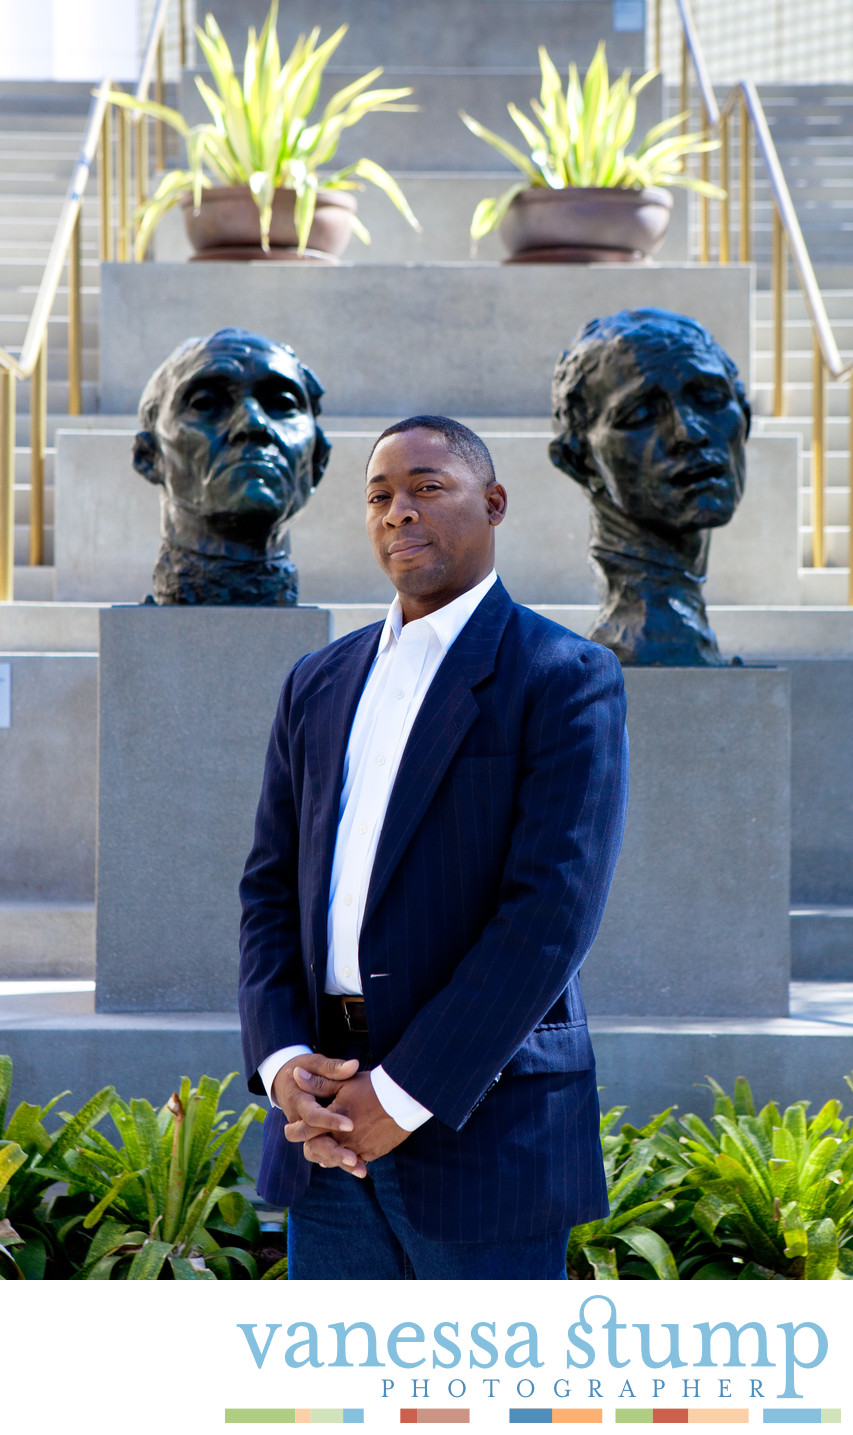 Franklin Sirmans - Curator of Contemporary Art at the Los Angeles County Museum of Art (LACMA)